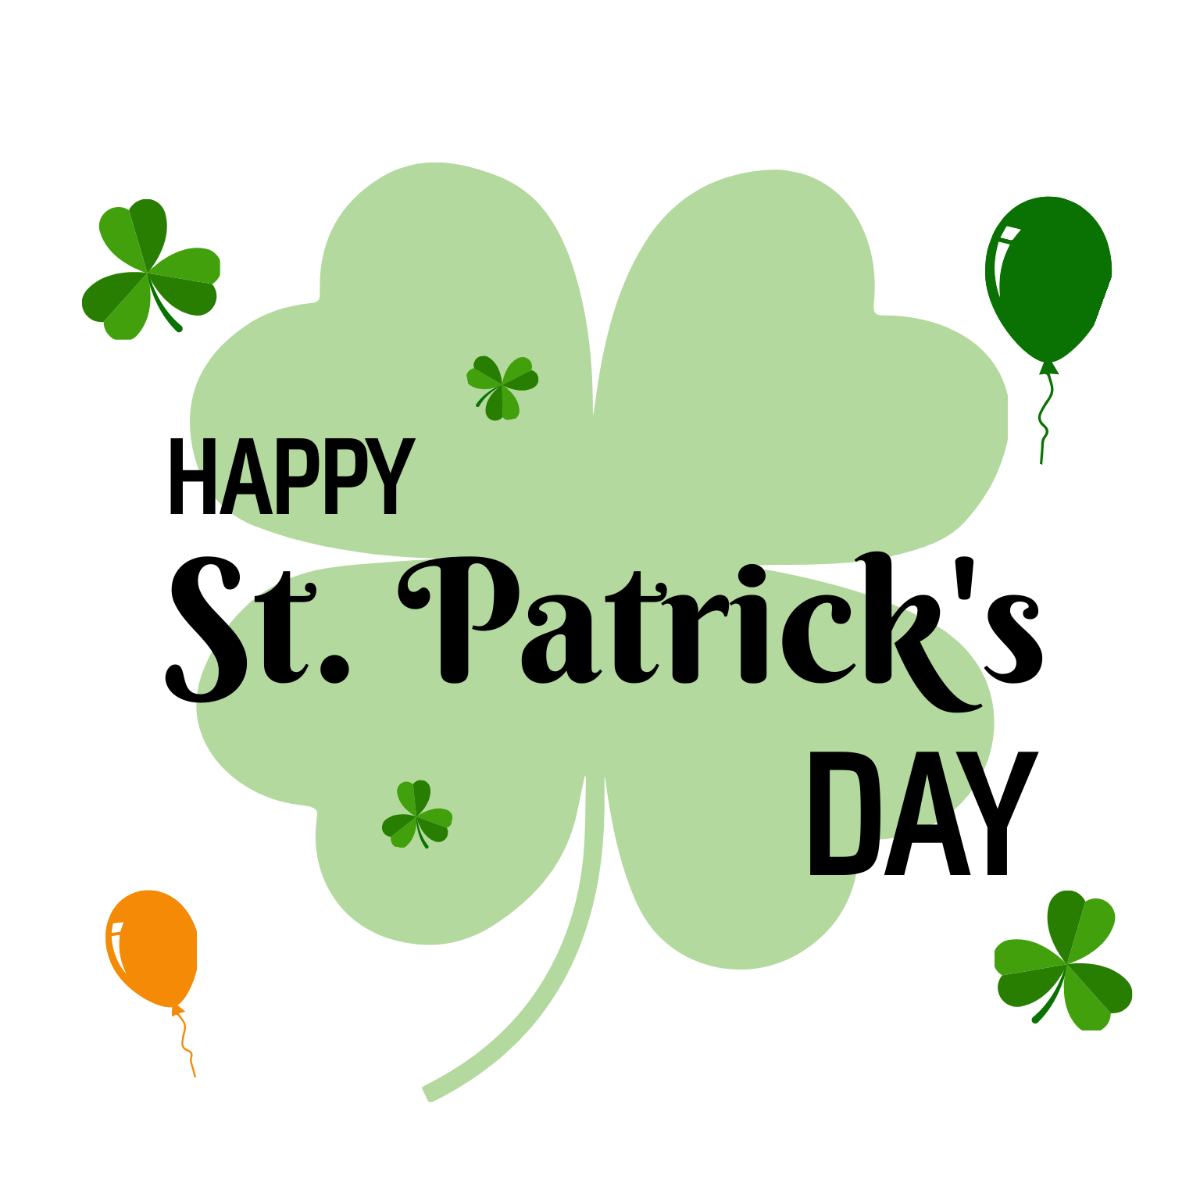 St. Patrick's Day Typography Vector